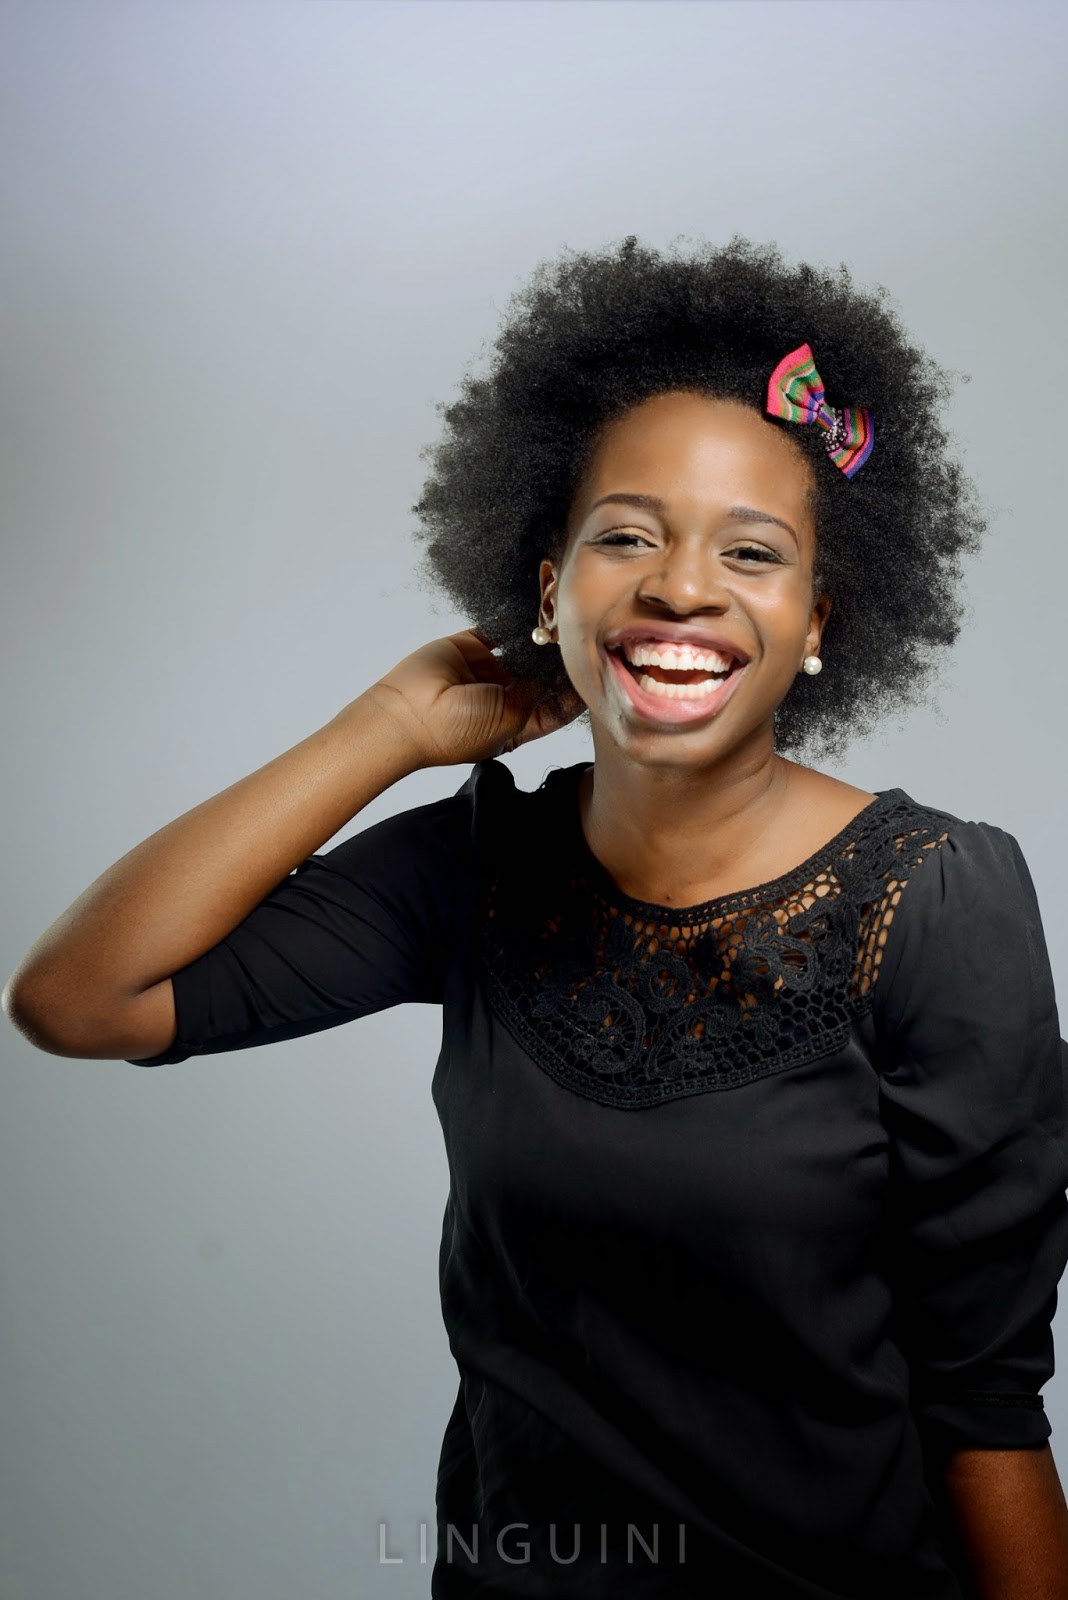 Beautiful Afro on a Happy Black Girl